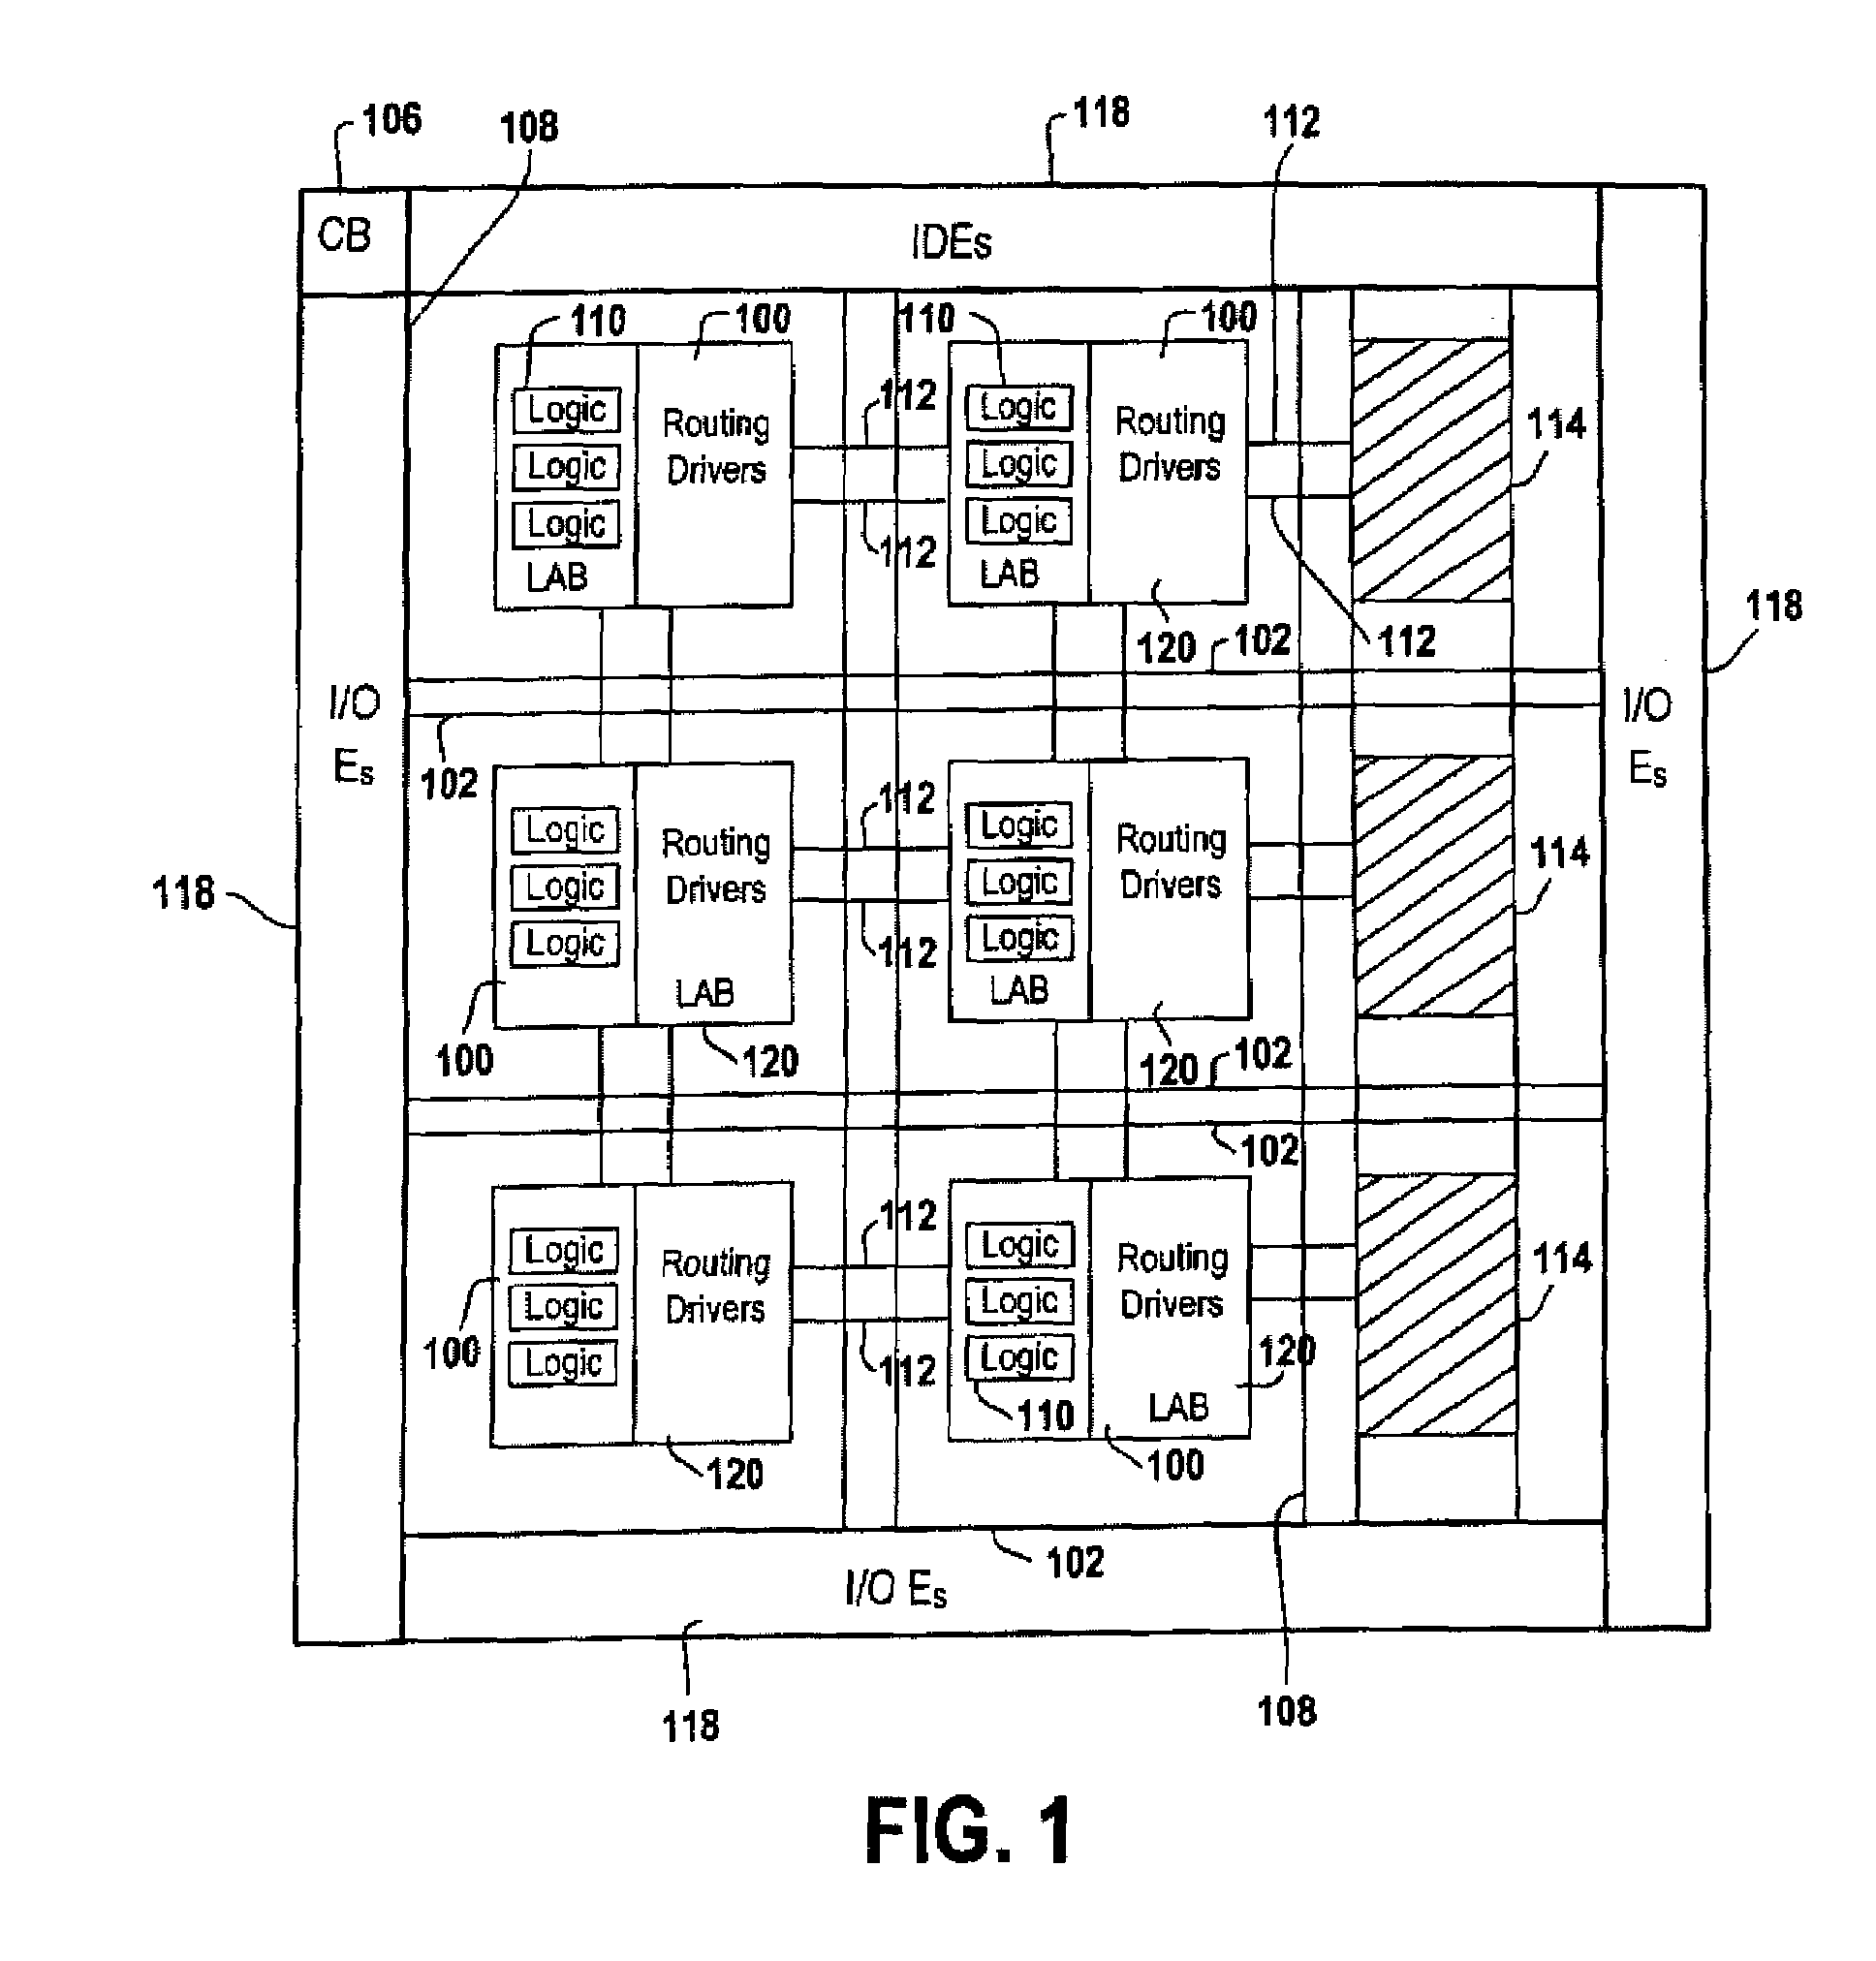 Method of reducing leakage current using sleep transistors in programmable logic device